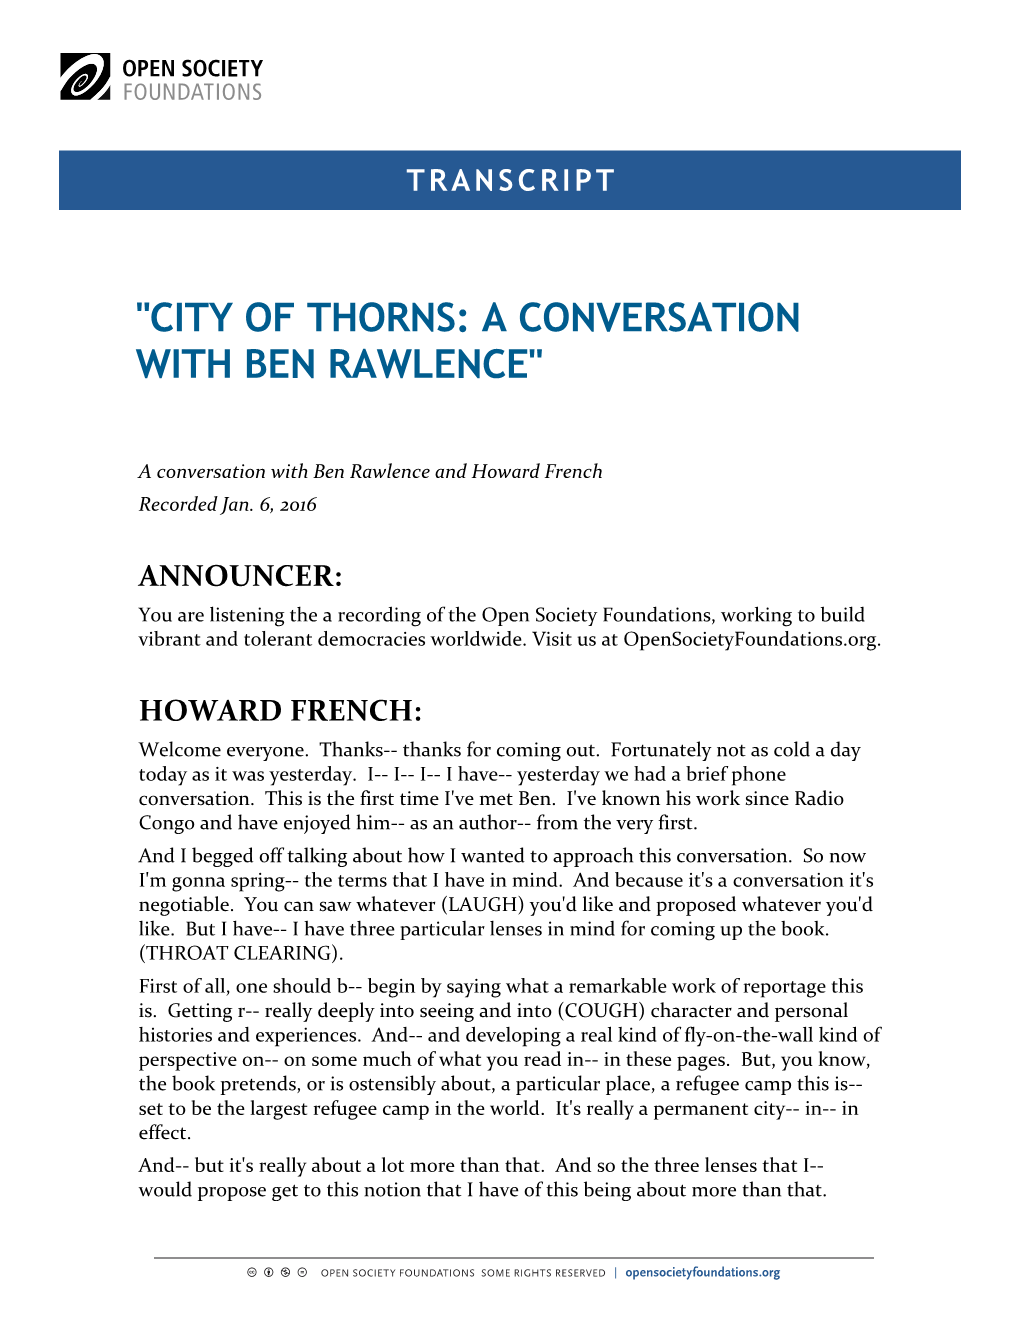 "City of Thorns: a Conversation with Ben Rawlence"